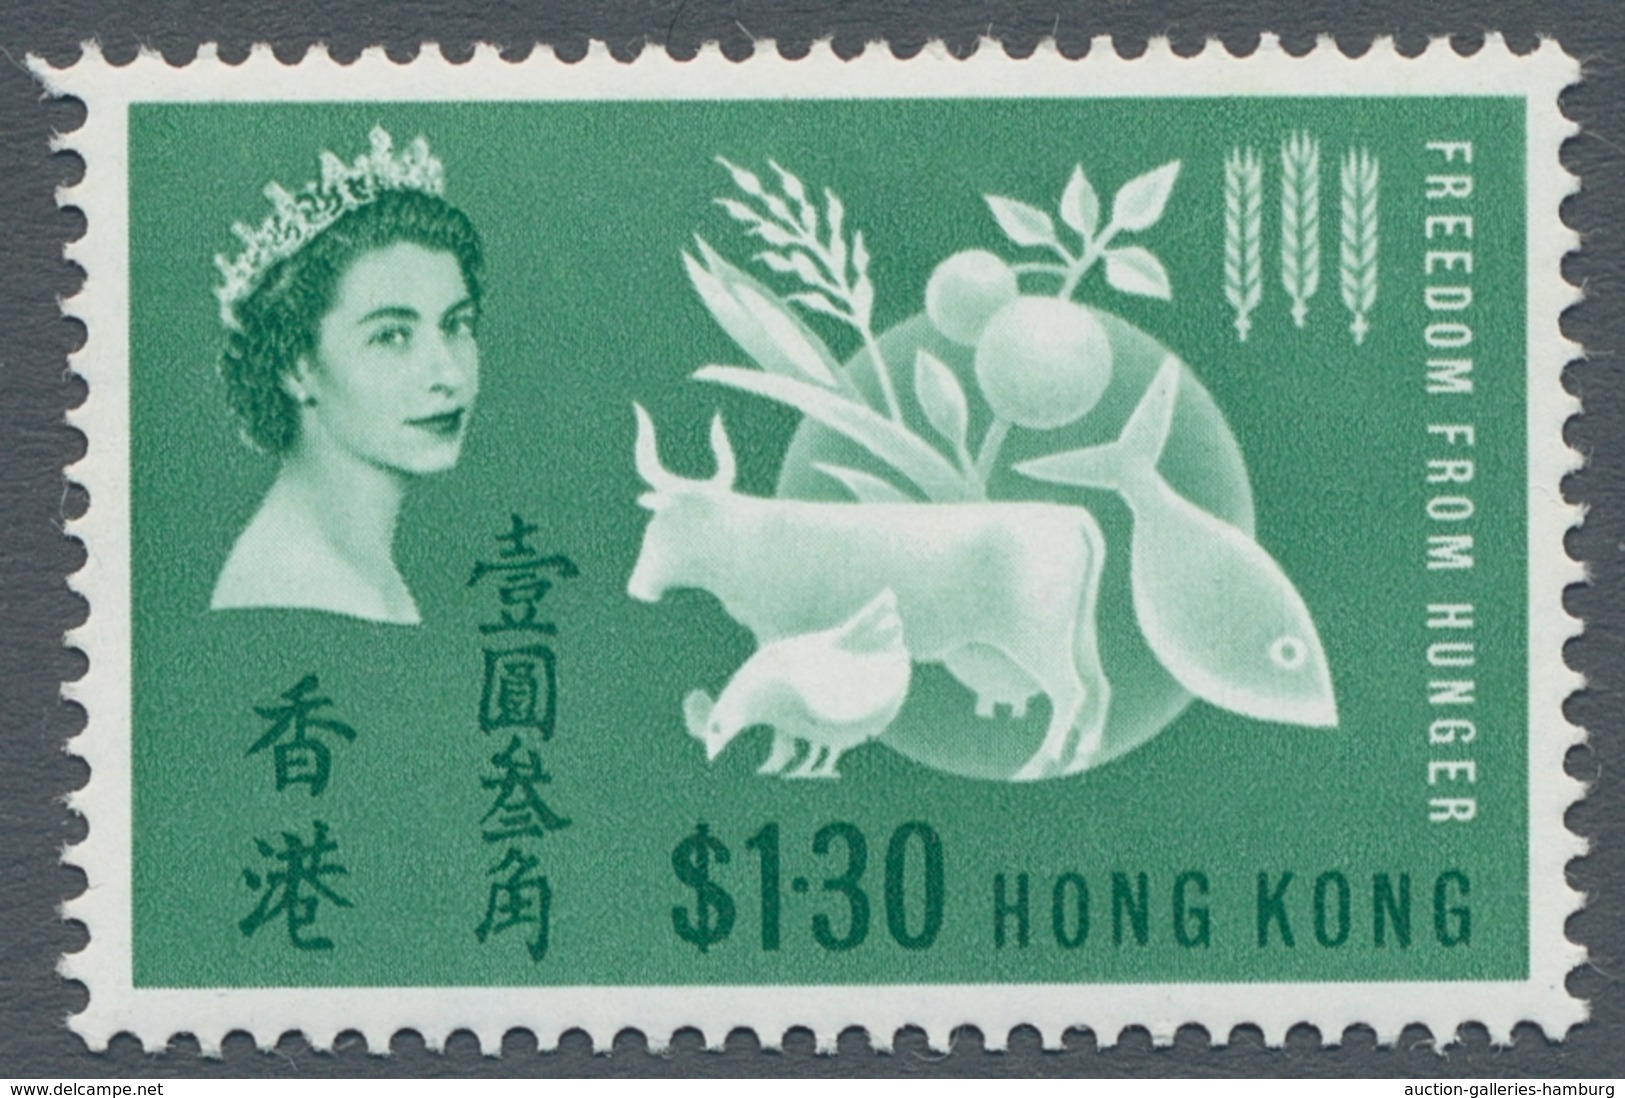 Hongkong: 1953 - 1997, wonderful collection MNH in very fine to superb quality, housed on self made